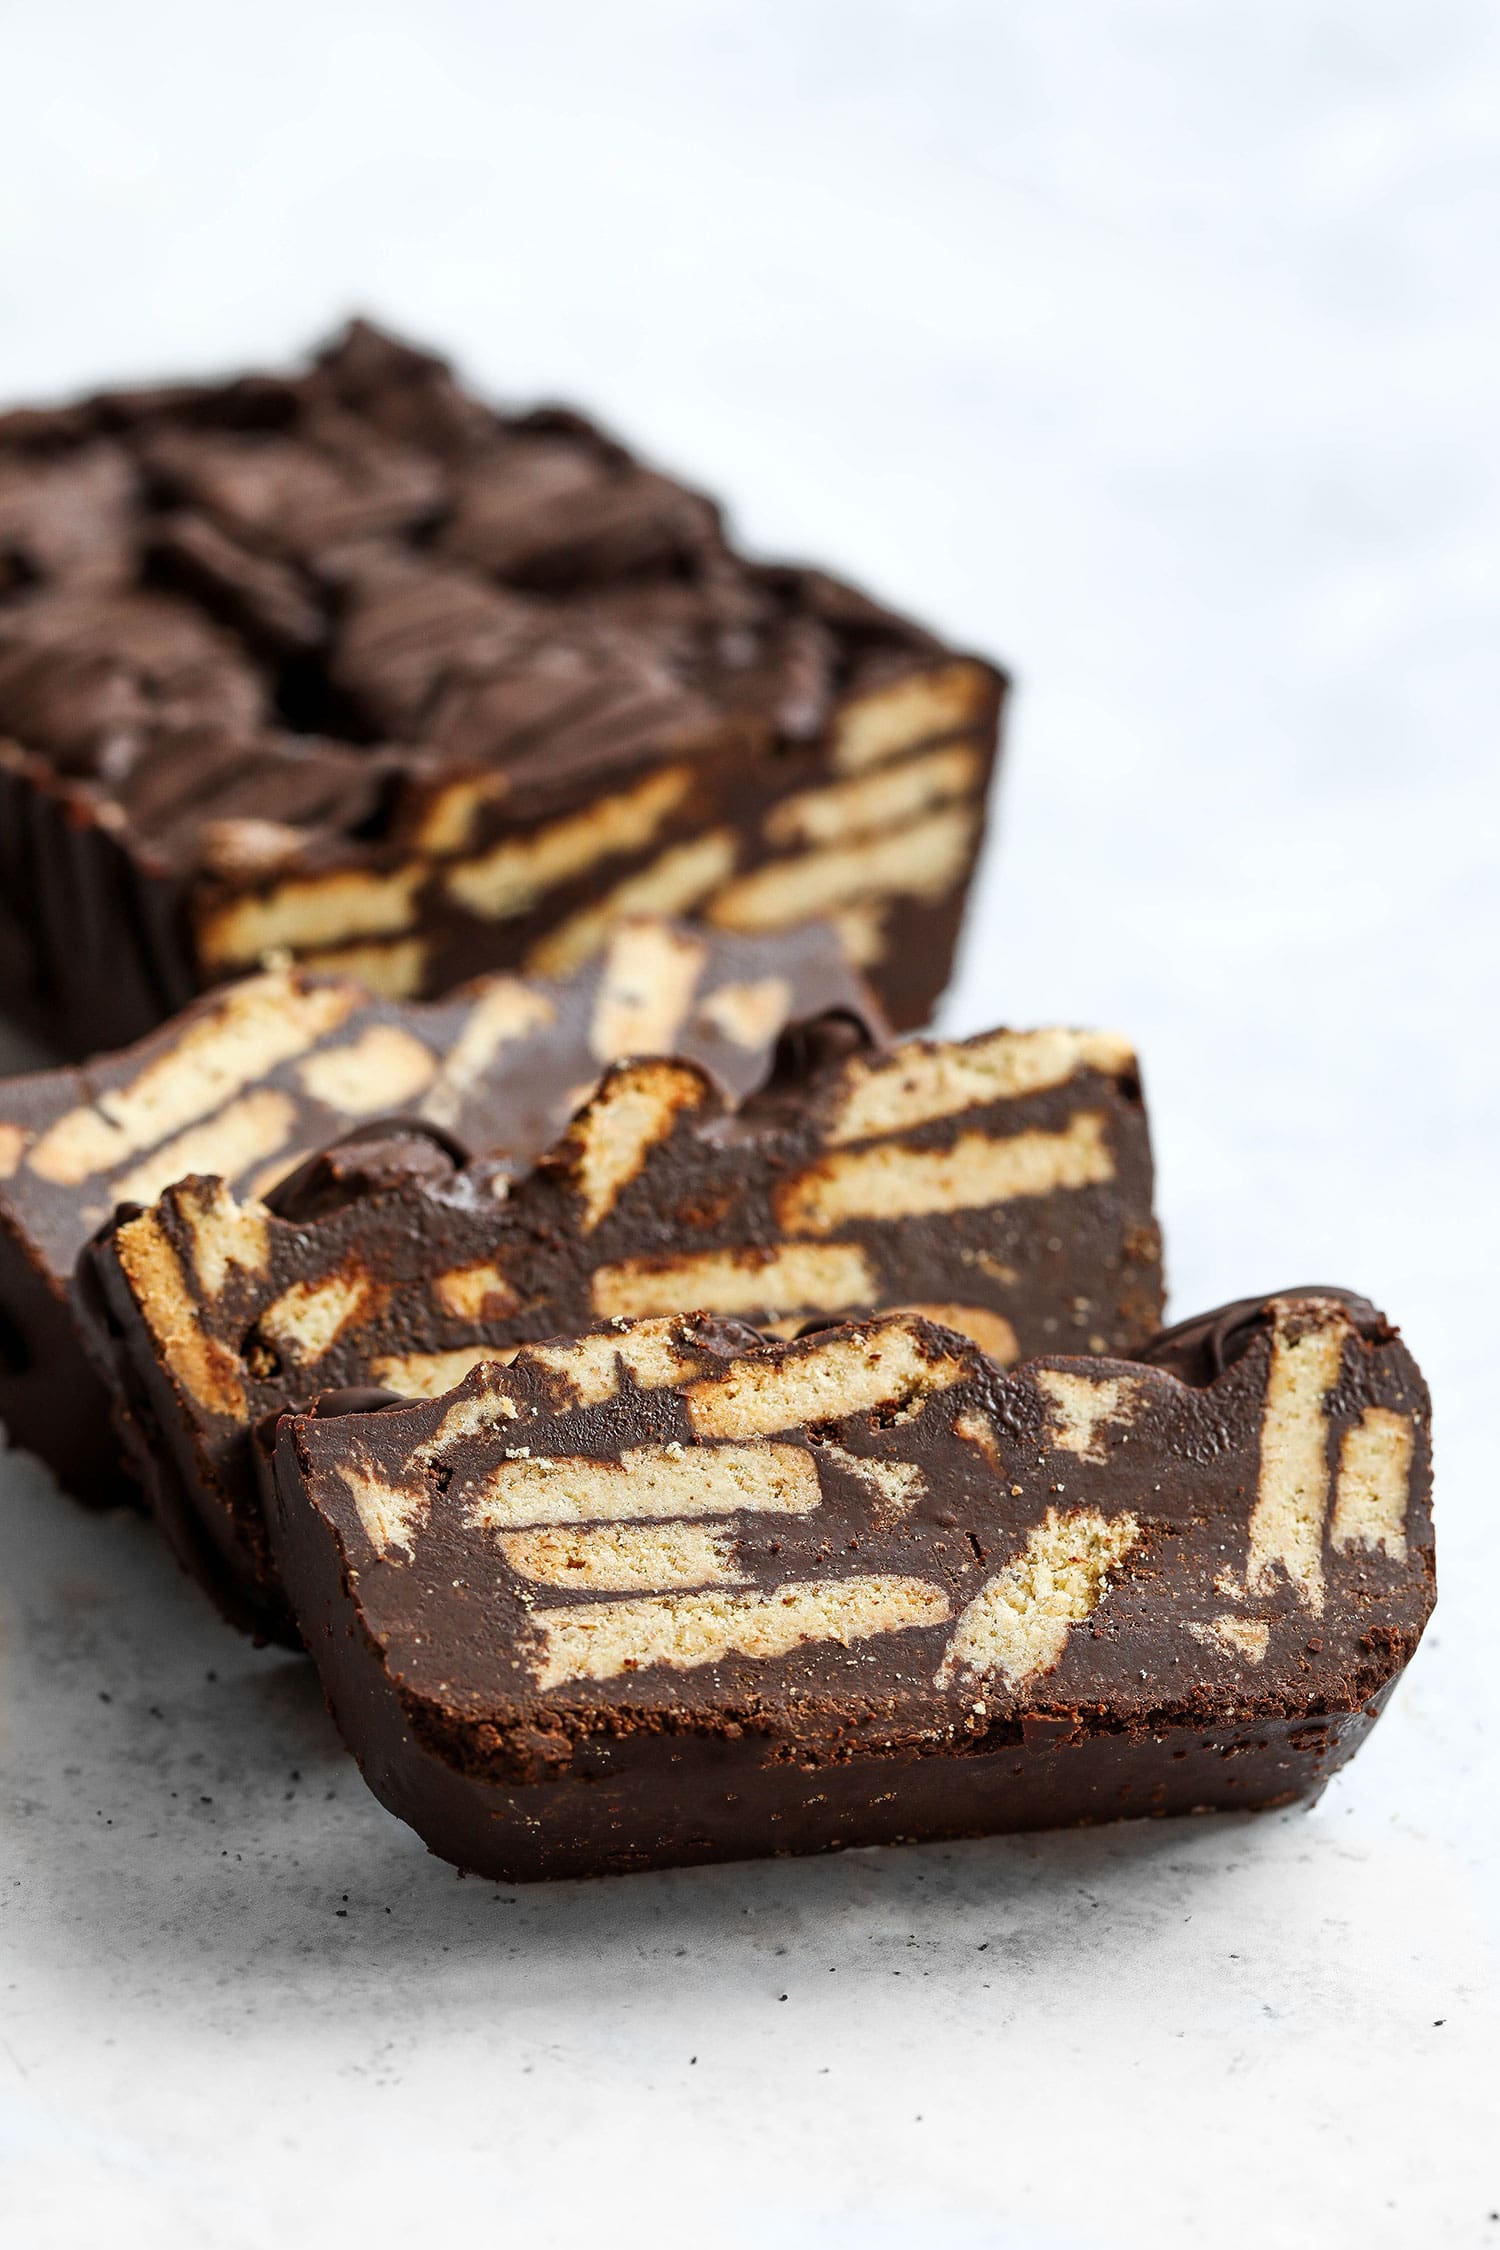 Delicious whisky and chocolate Lotus biscuit fridge cake recipe from food  writer Fabienne Viner-Luzzato - The Jewish Chronicle